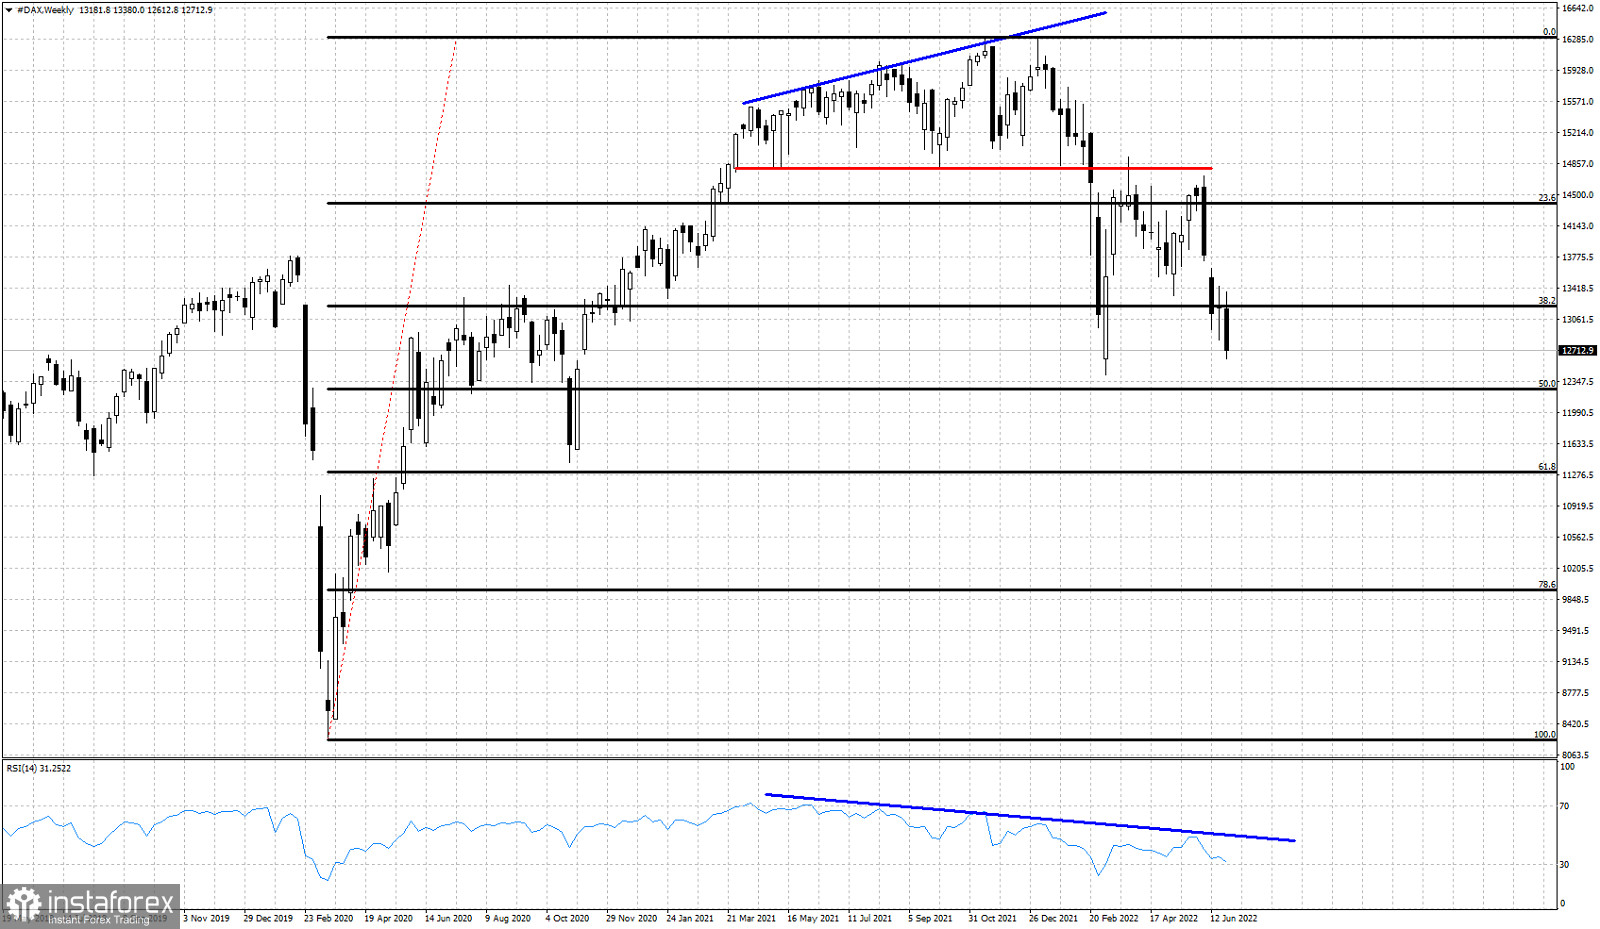 DAX approaches key weekly support.